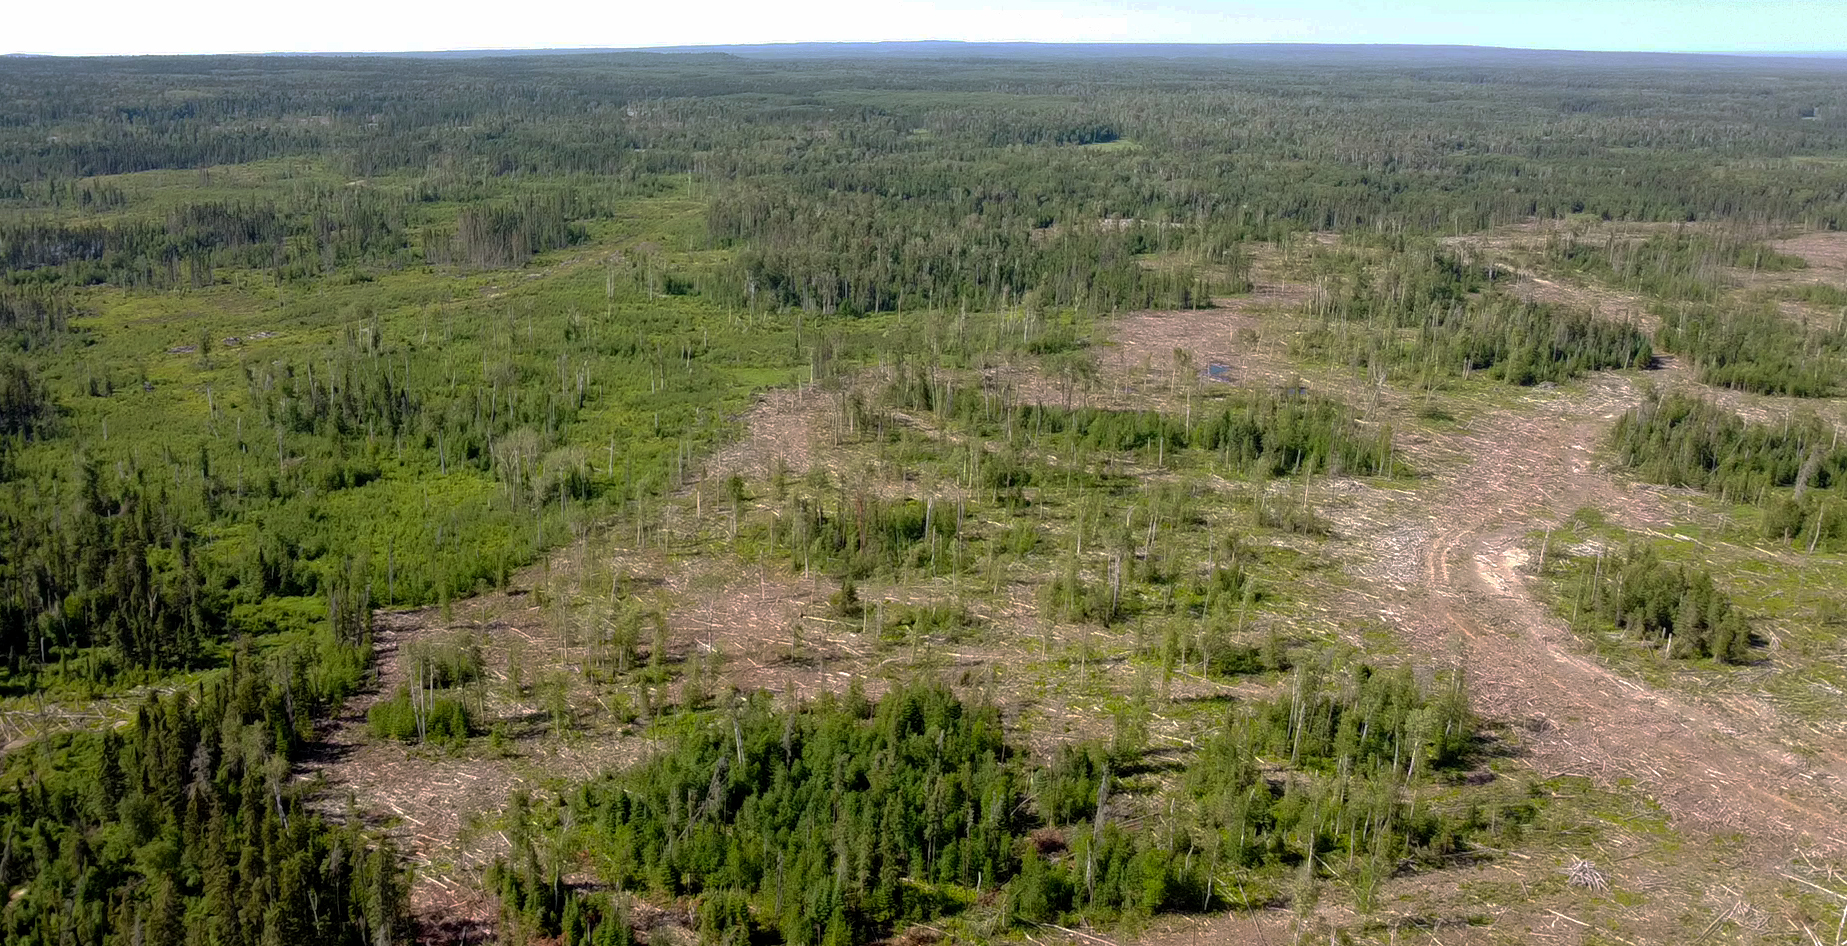 Large clearcuts in Duck Mountain Provincial Park